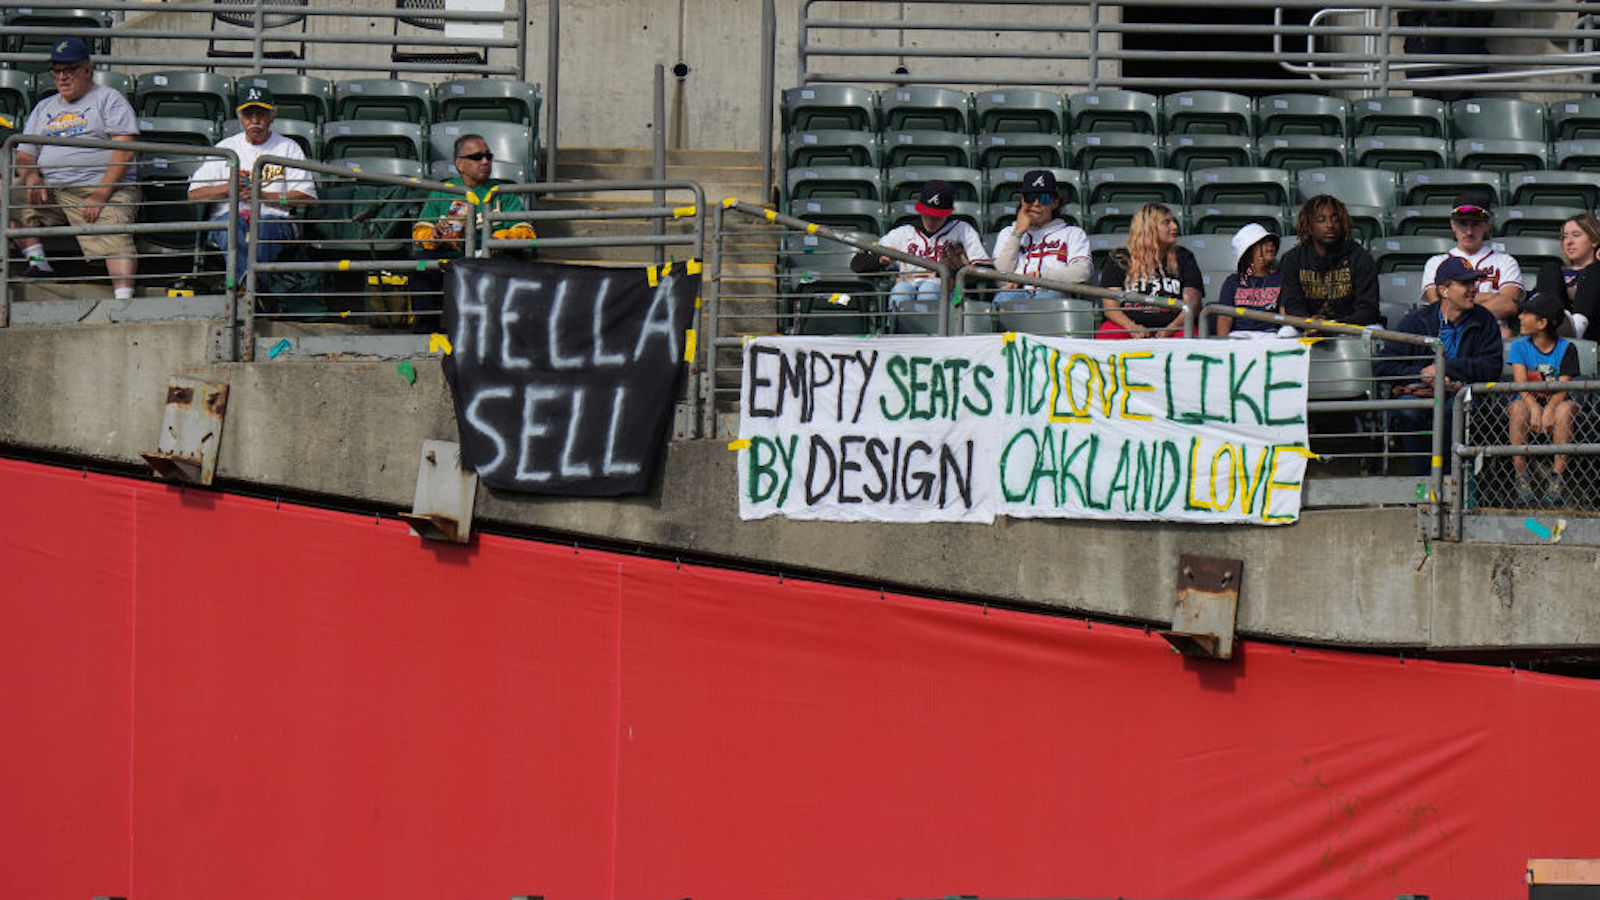 OAKLAND, CALIFORNIA - MAY 29: Fans sit behind signs referencing plans for the Oakland Athletics to move to Las Vegas during a game against the Atlanta Braves at RingCentral Coliseum on May 29, 2023 in Oakland, California.